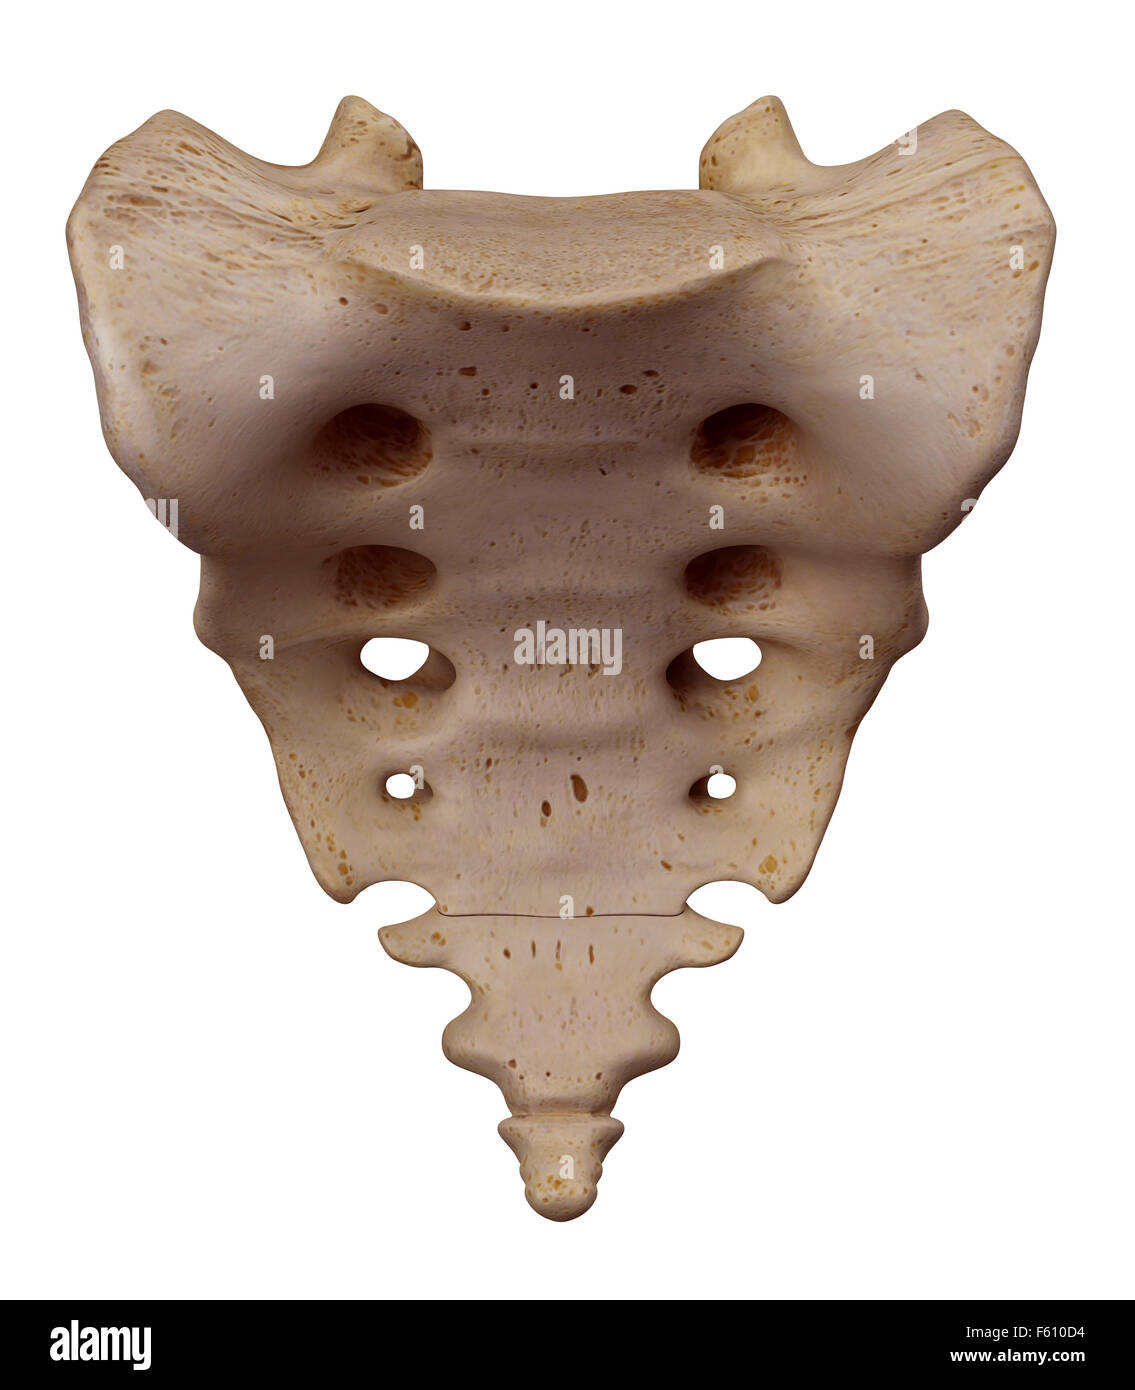 medically accurate illustration of the sacrum Stock Photo